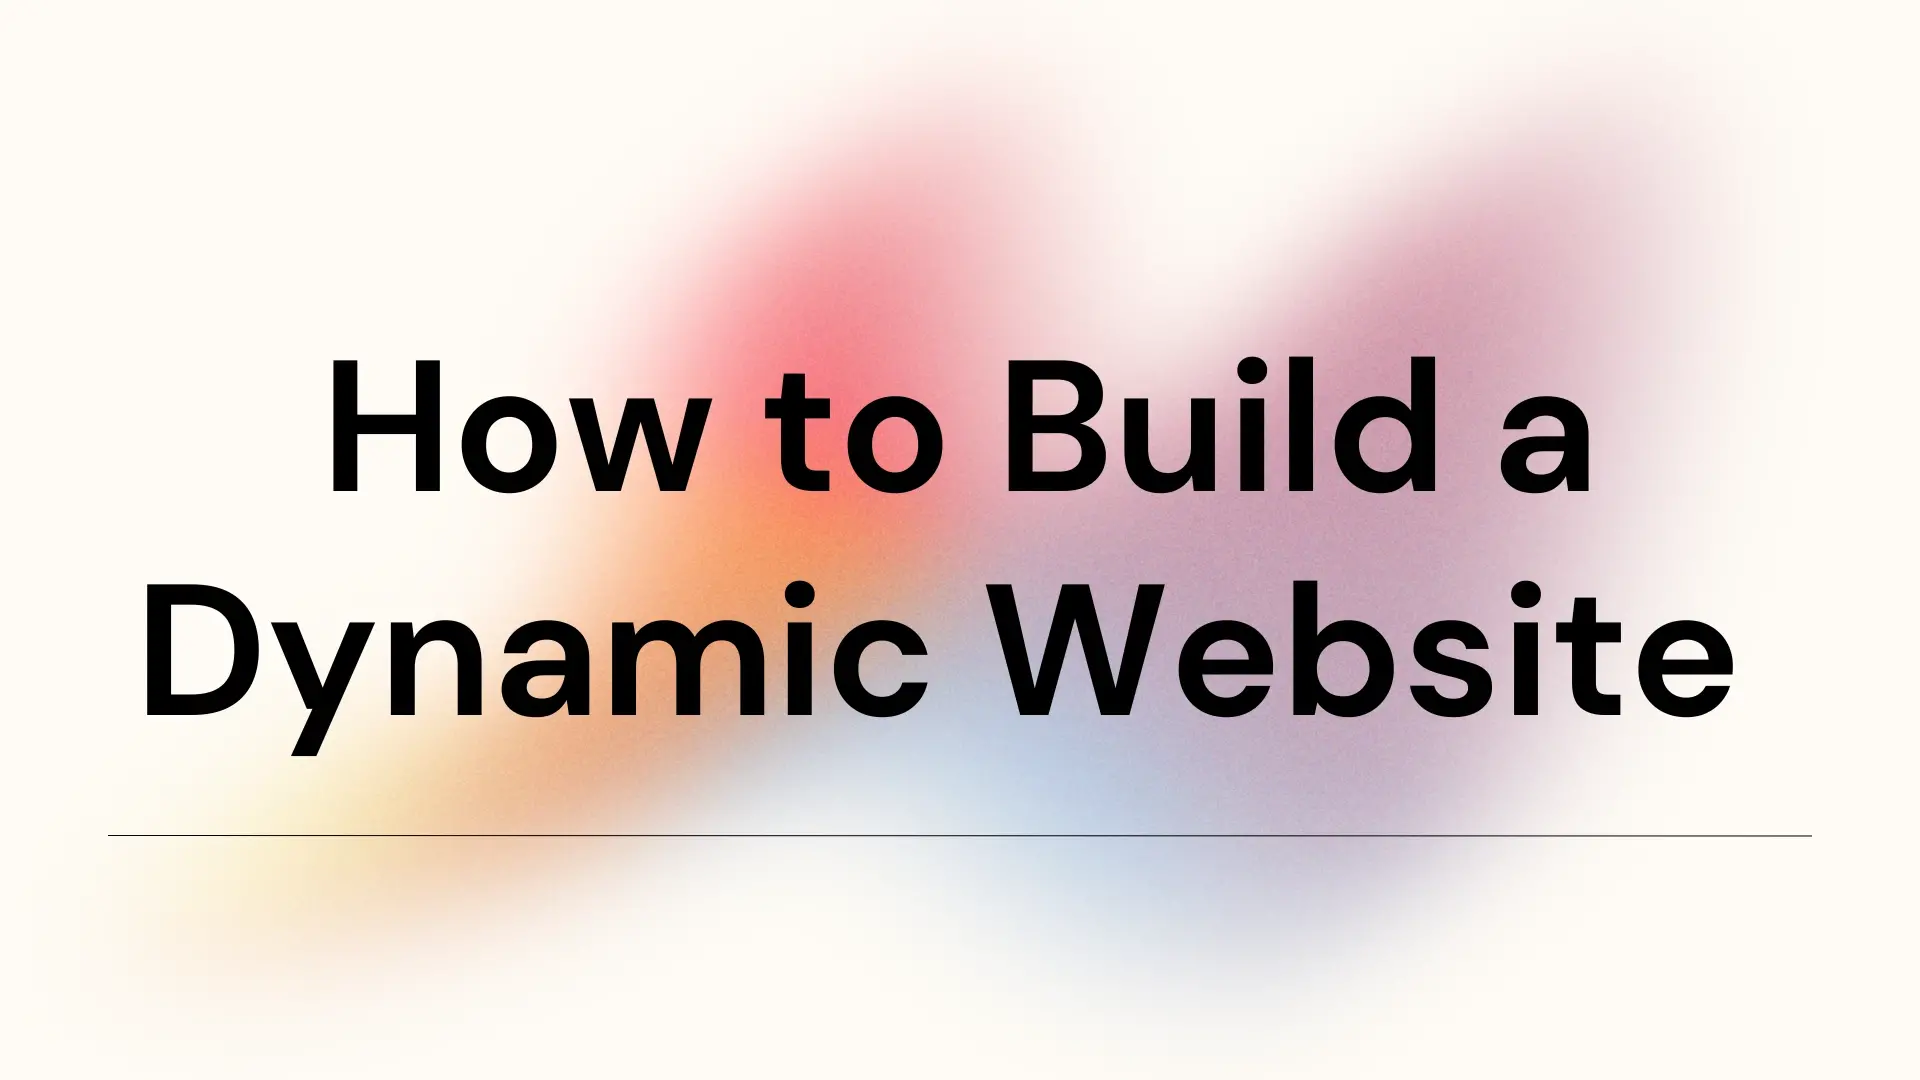 How to Build a Dynamic Website from Scratch